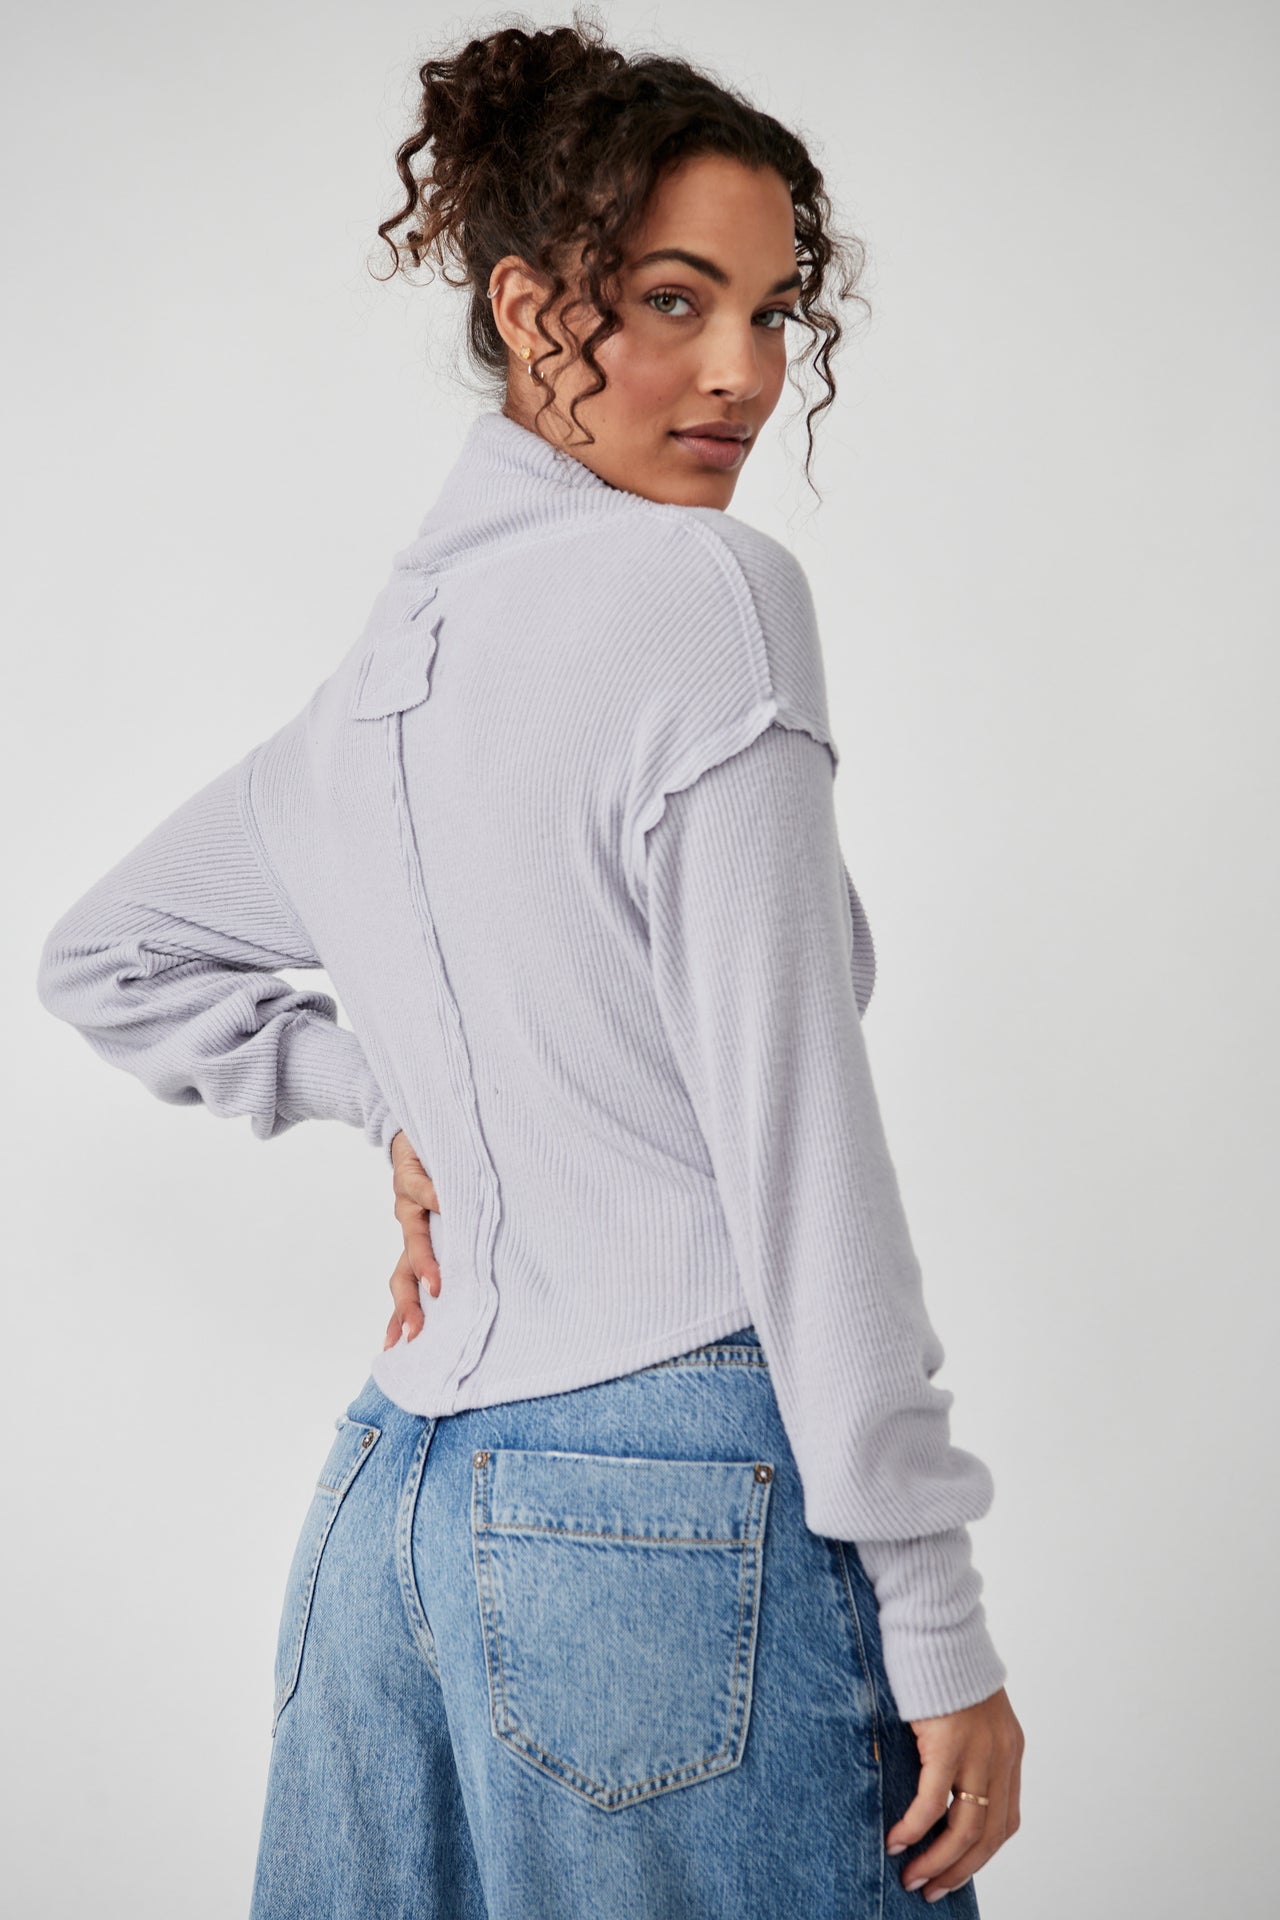 Hold Me Close Chambray Sky, Sweater by Free People | LIT Boutique